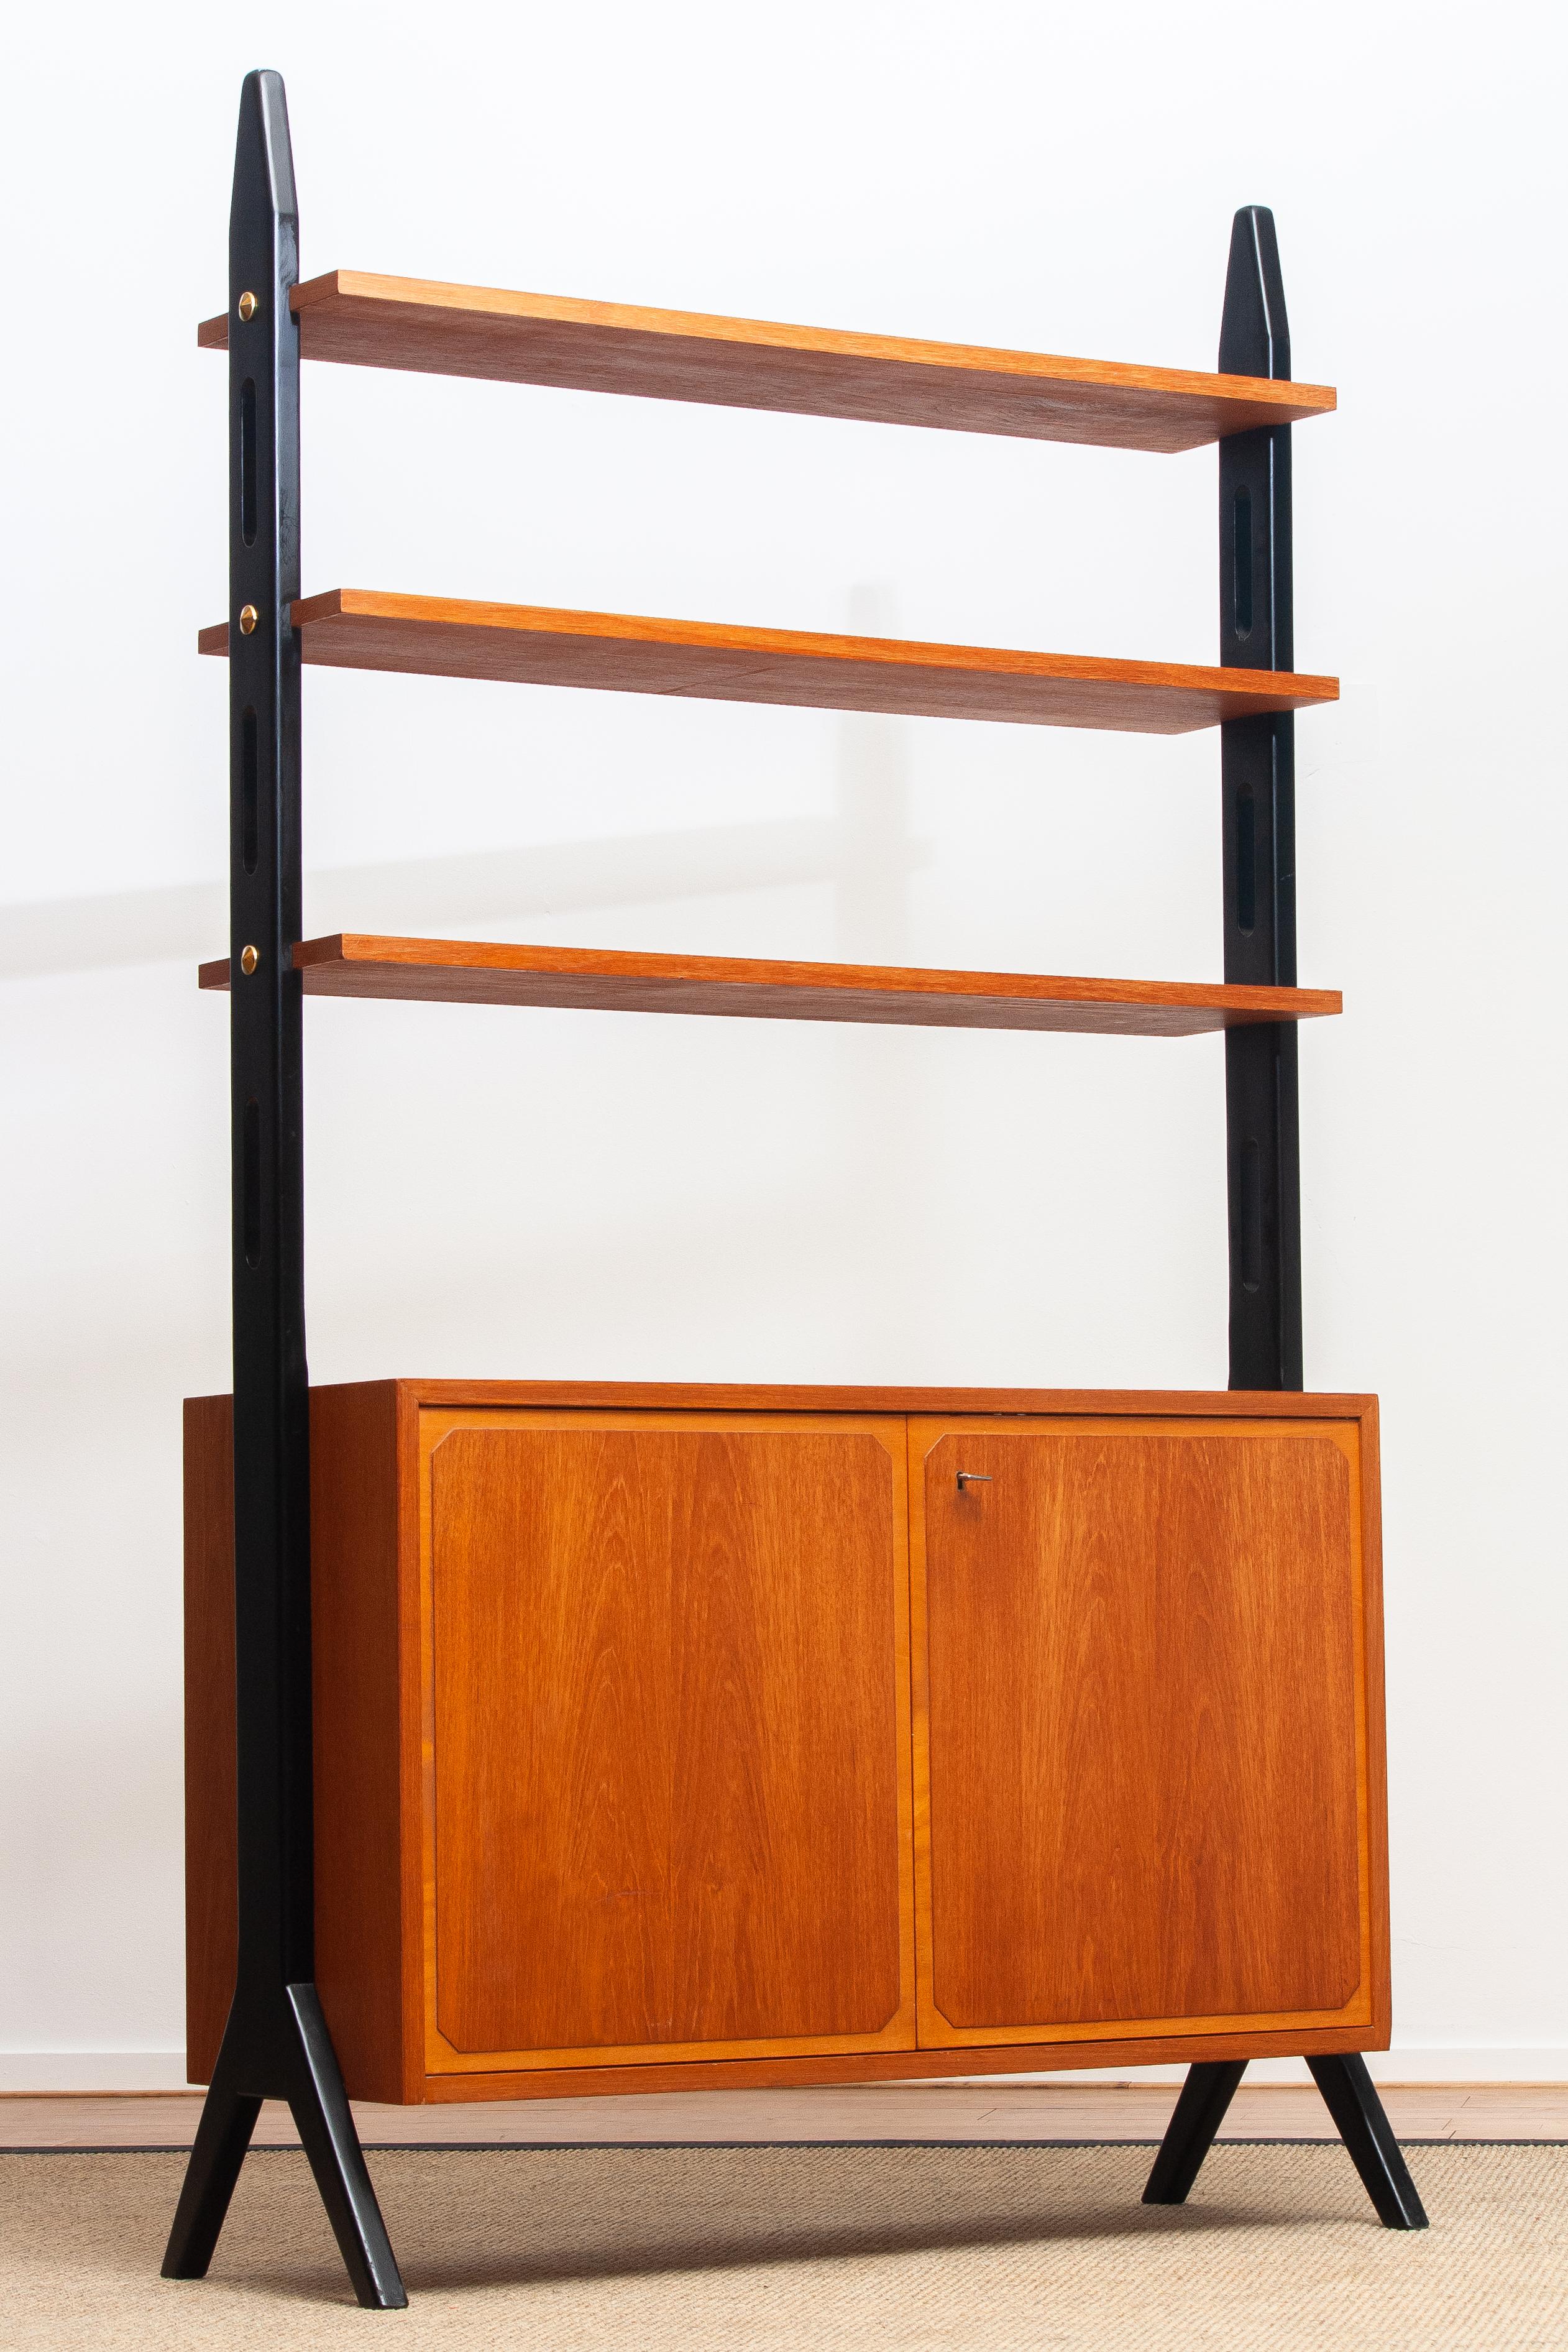 Beautiful Swedish bookcase or room divider or shelf’s made in teak from the 1950s.
Two folding doors, with a lock, inside the cabinet is a shelf that can be adjusted in two positions.
The three top shelf’s are placed in a fixed position.
Overall